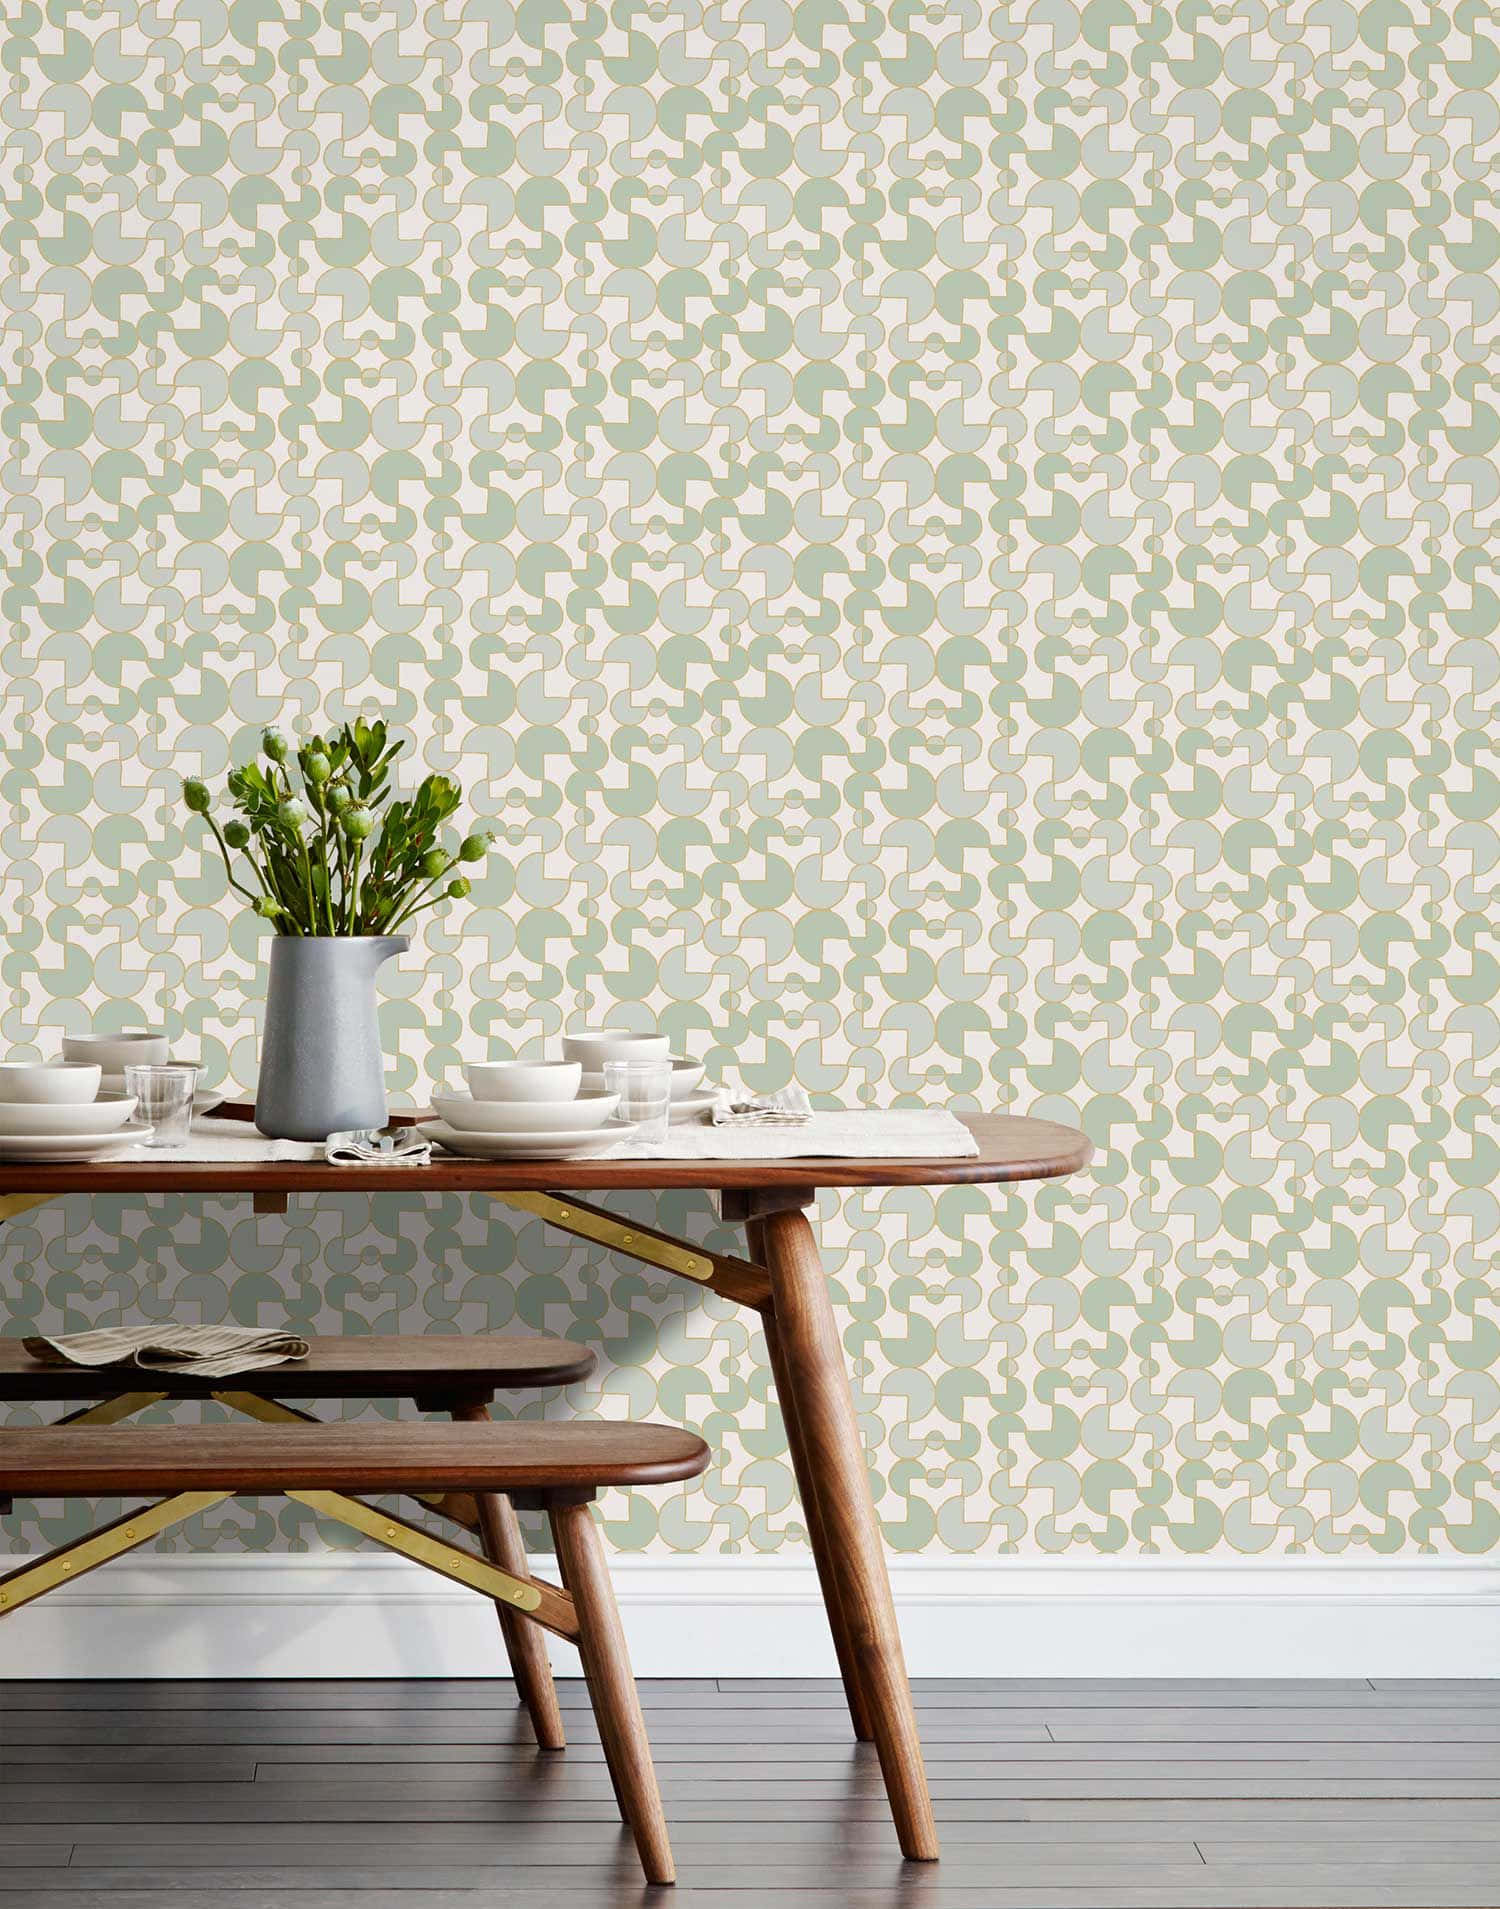 Intricate Ceramics crafted with love Wallpaper